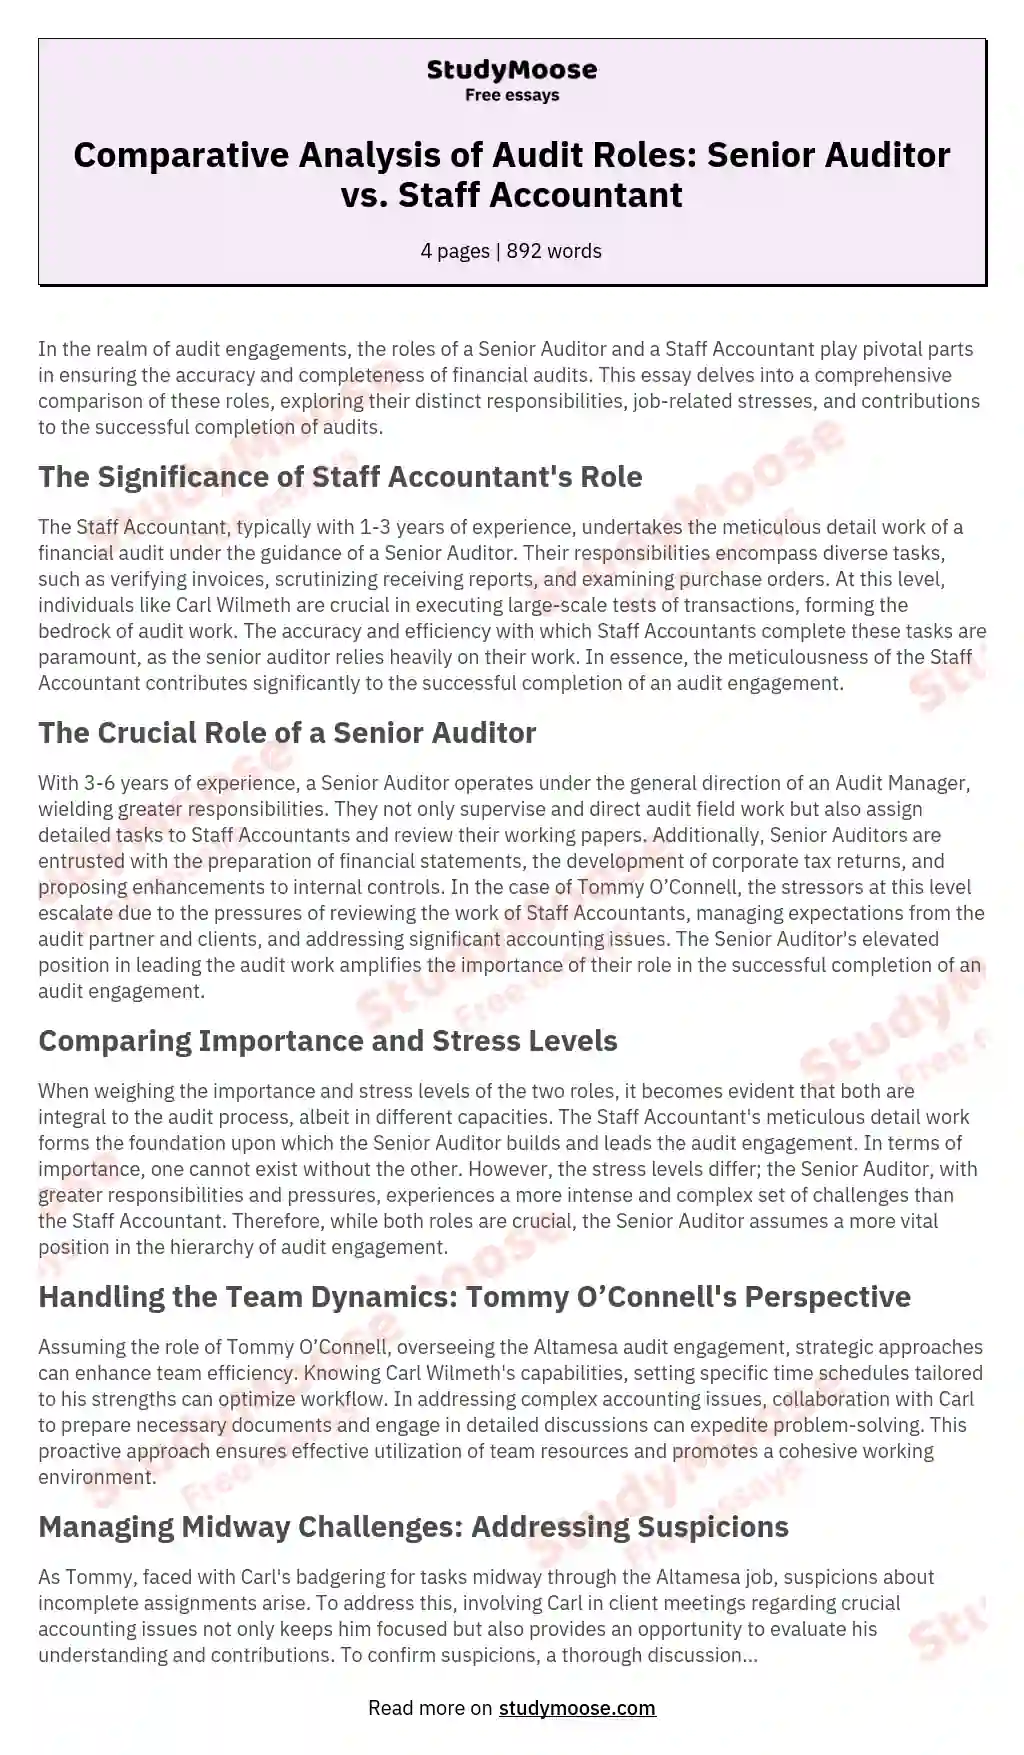 Comparative Analysis of Audit Roles: Senior Auditor vs. Staff Accountant essay